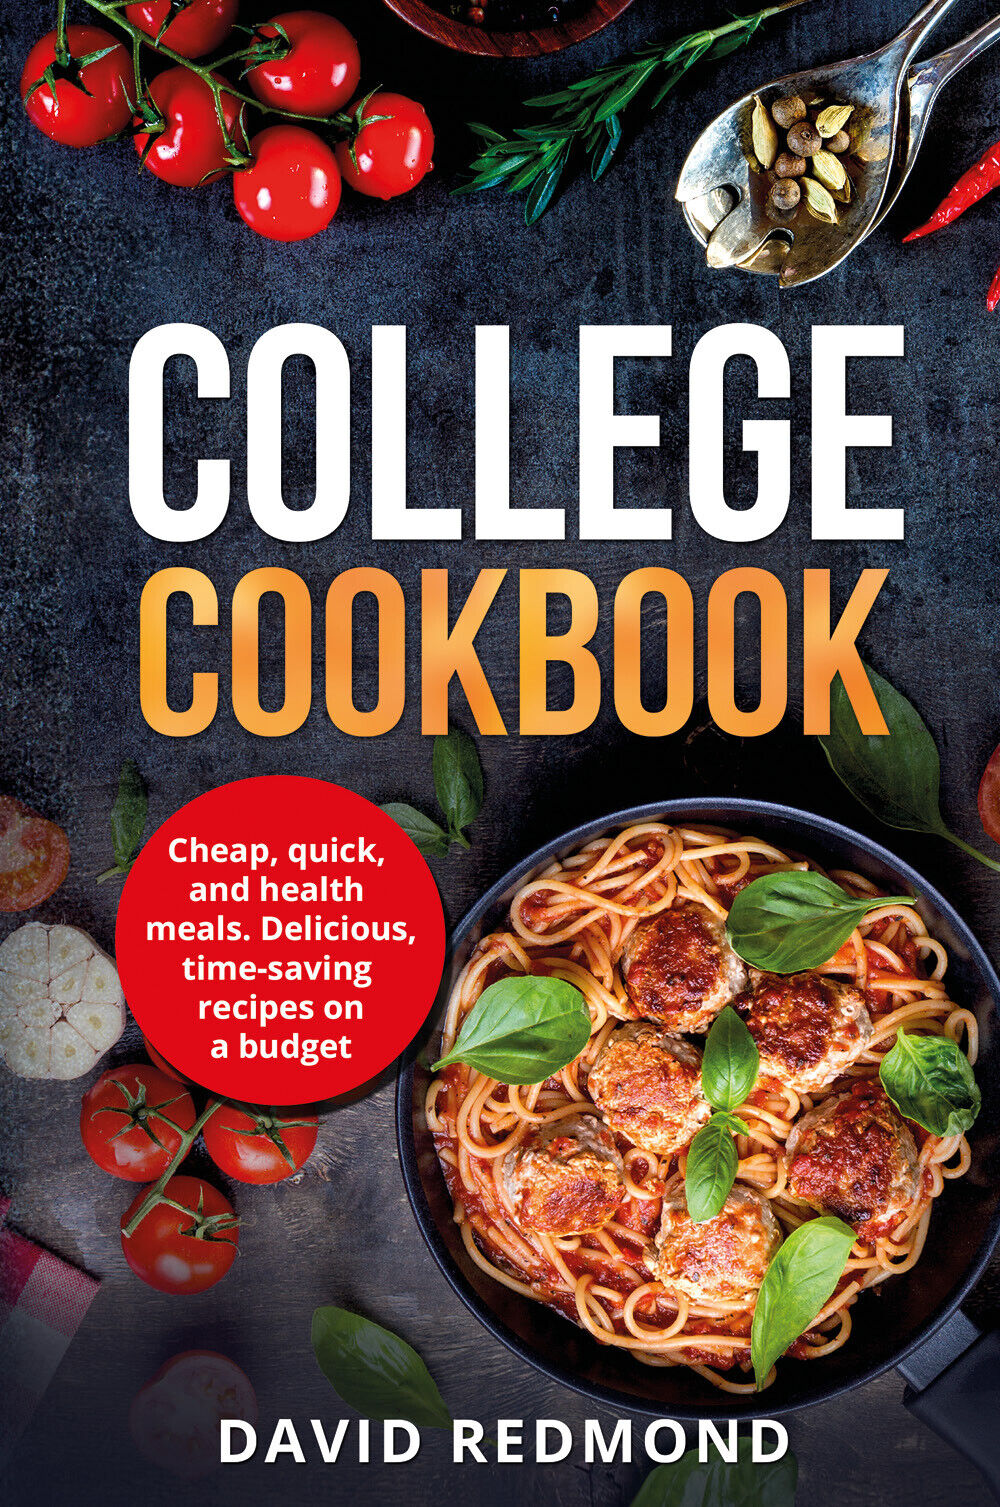 College Cookbook. Cheap, quick, and healthy meals. Delicious,time-saving recipes